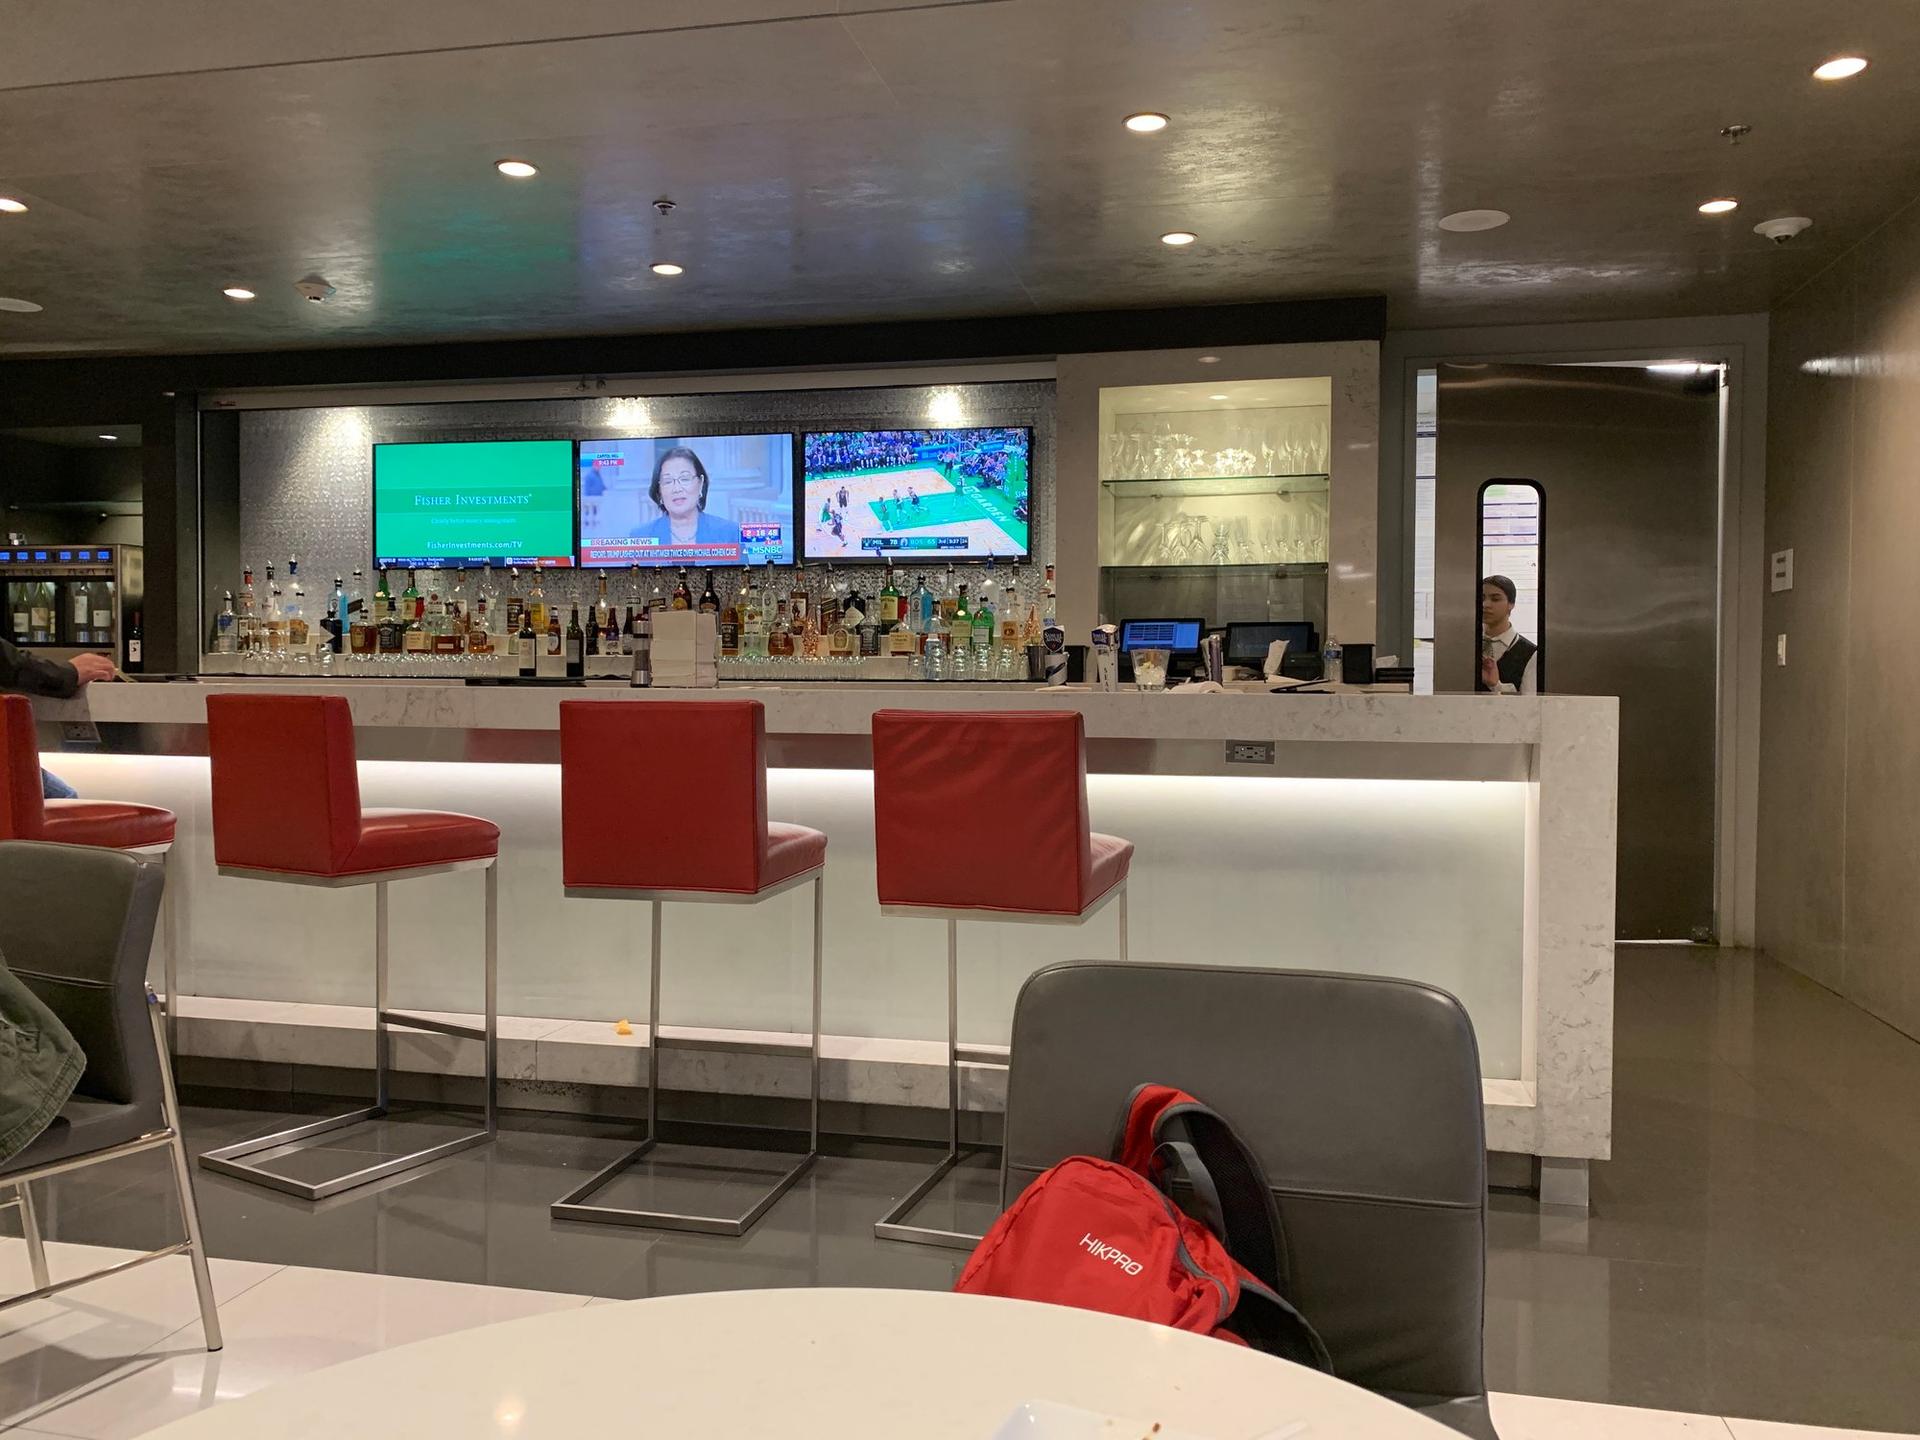 American Airlines Admirals Club (Gate D15) image 7 of 25